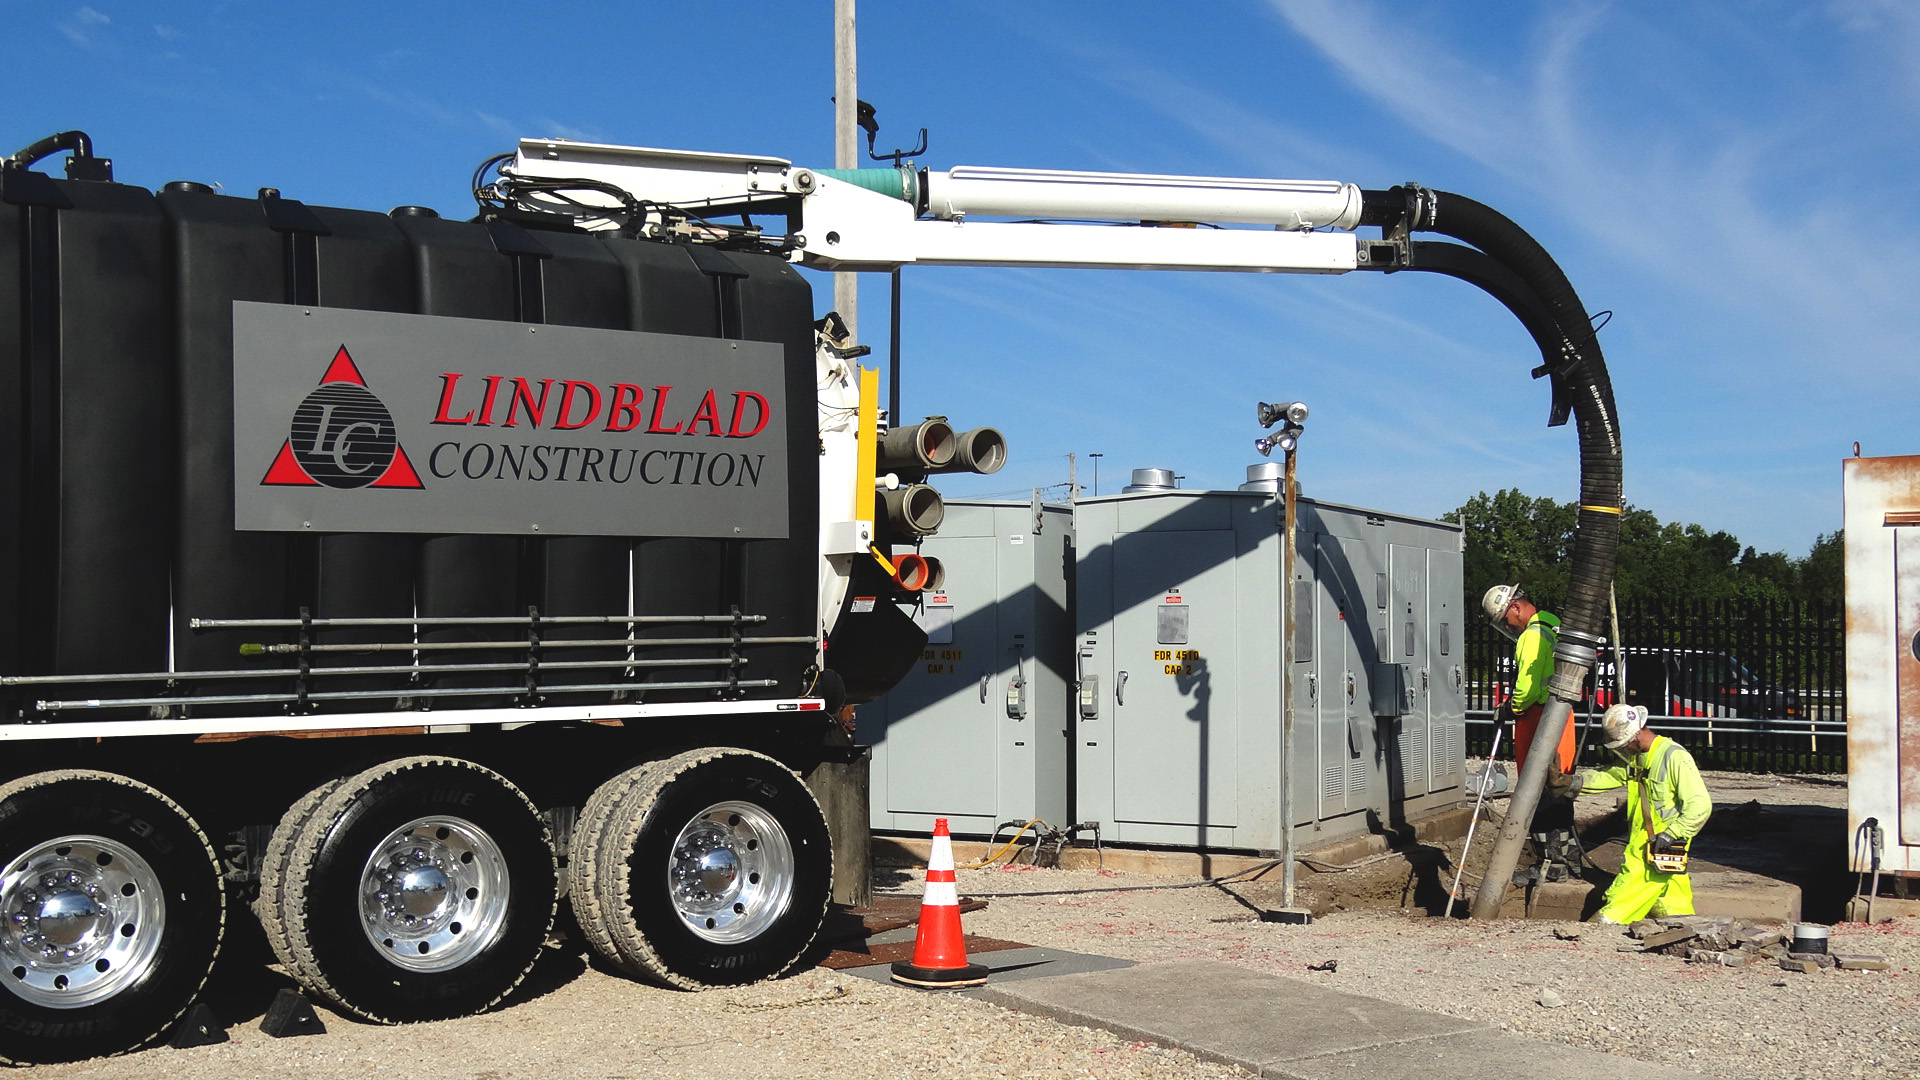 Lindblad Construction Vac Truck with Workers